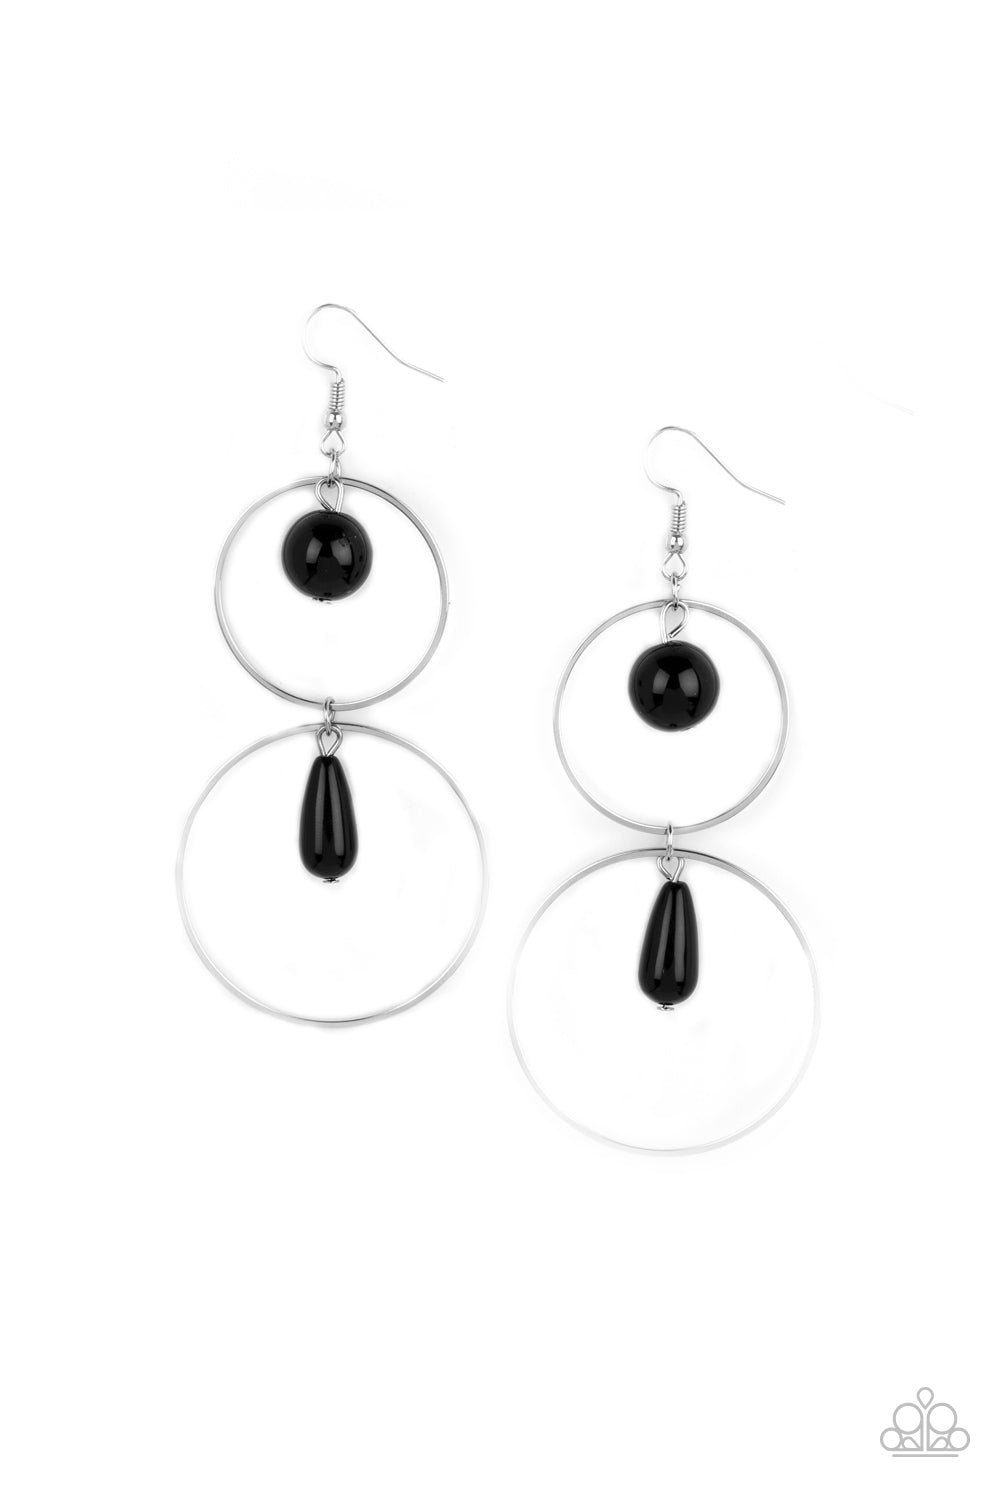 ﻿Cultured in Couture Black Earring - Paparazzi Accessories  A classic black bead swings from the top of a shiny silver hoop that is linked to another silver hoop by a matching black bead, creating a stunningly stacked display. Earring attaches to a standard fishhook fitting.  ﻿All Paparazzi Accessories are lead free and nickel free!  Sold as one pair of earrings.